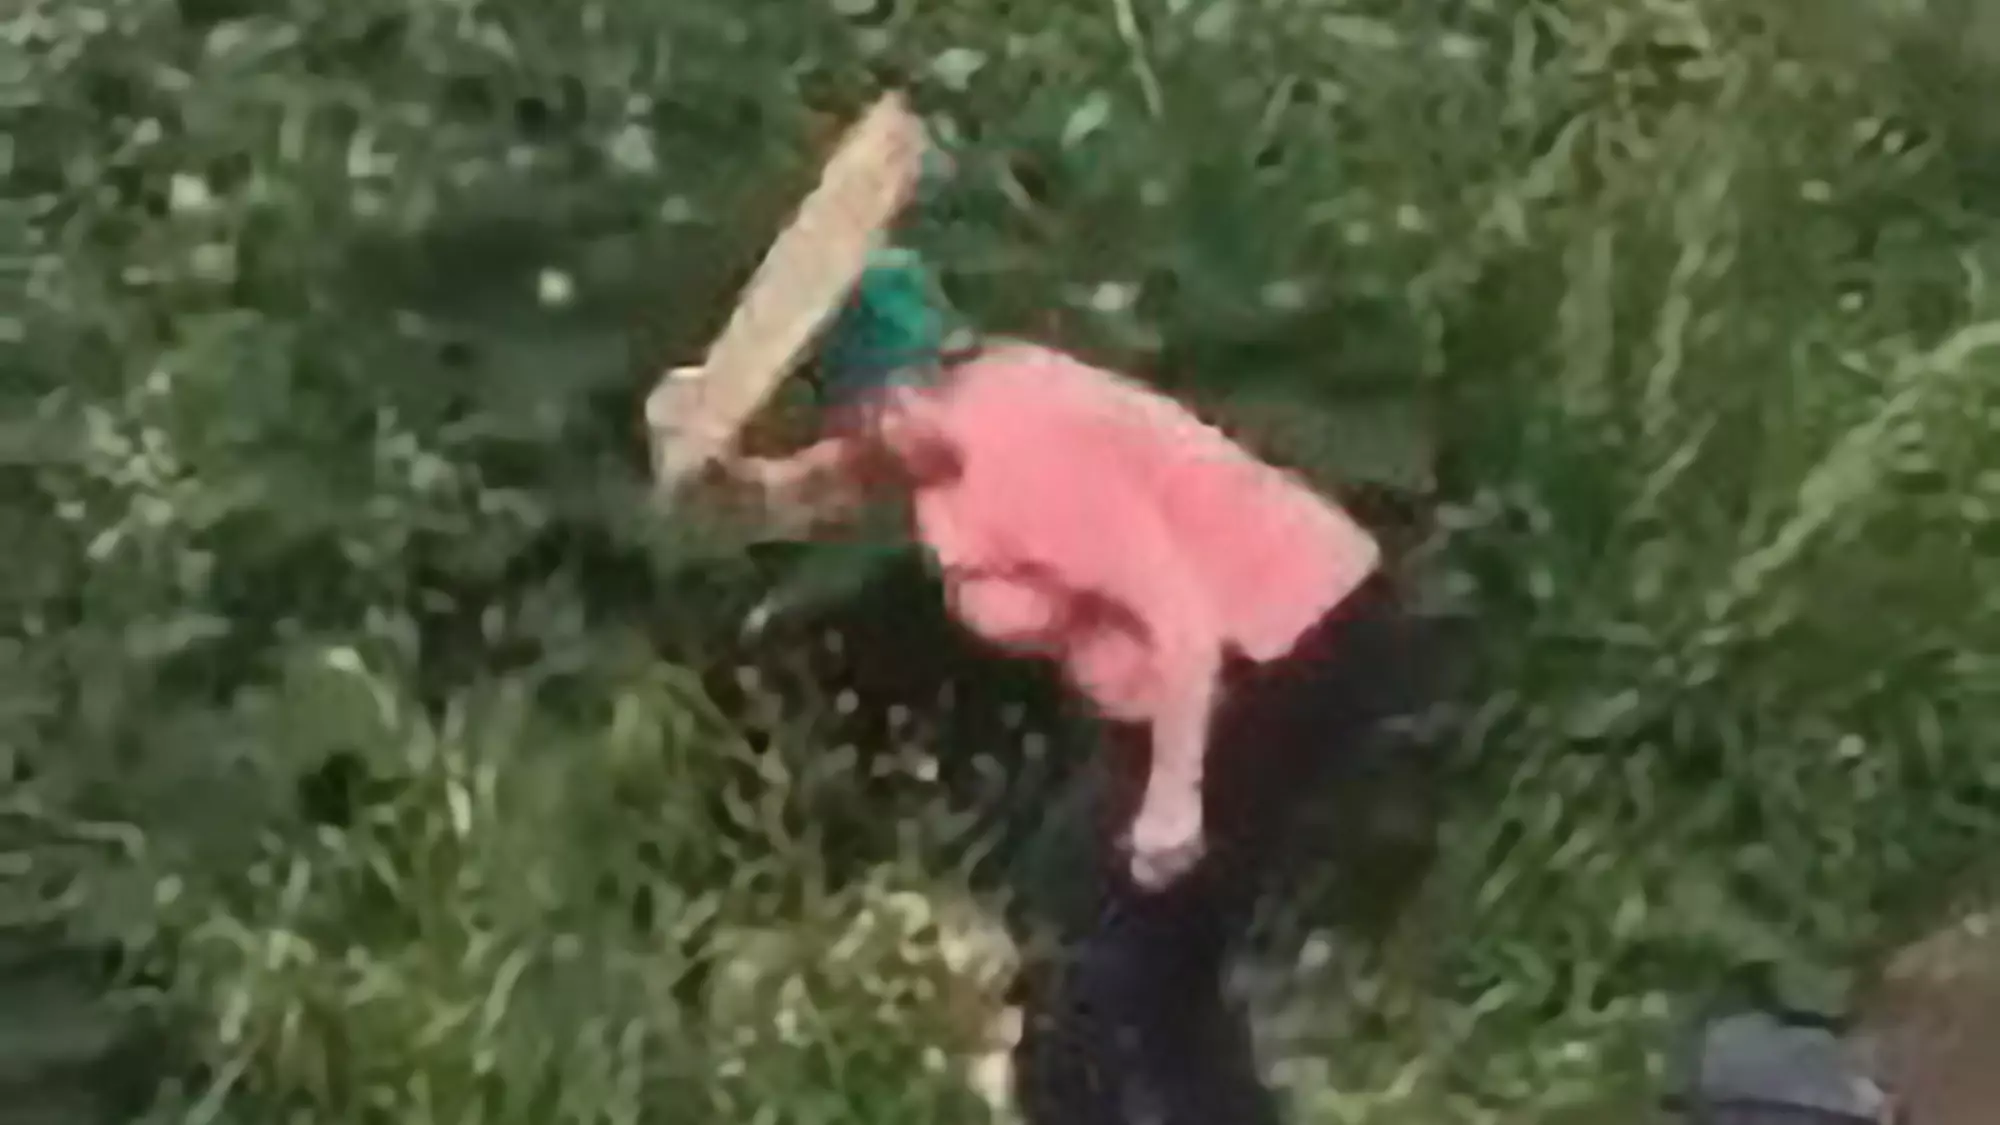 Angry Woman Spanks Couple With Plank After Catching Them Having Sex In A Bush